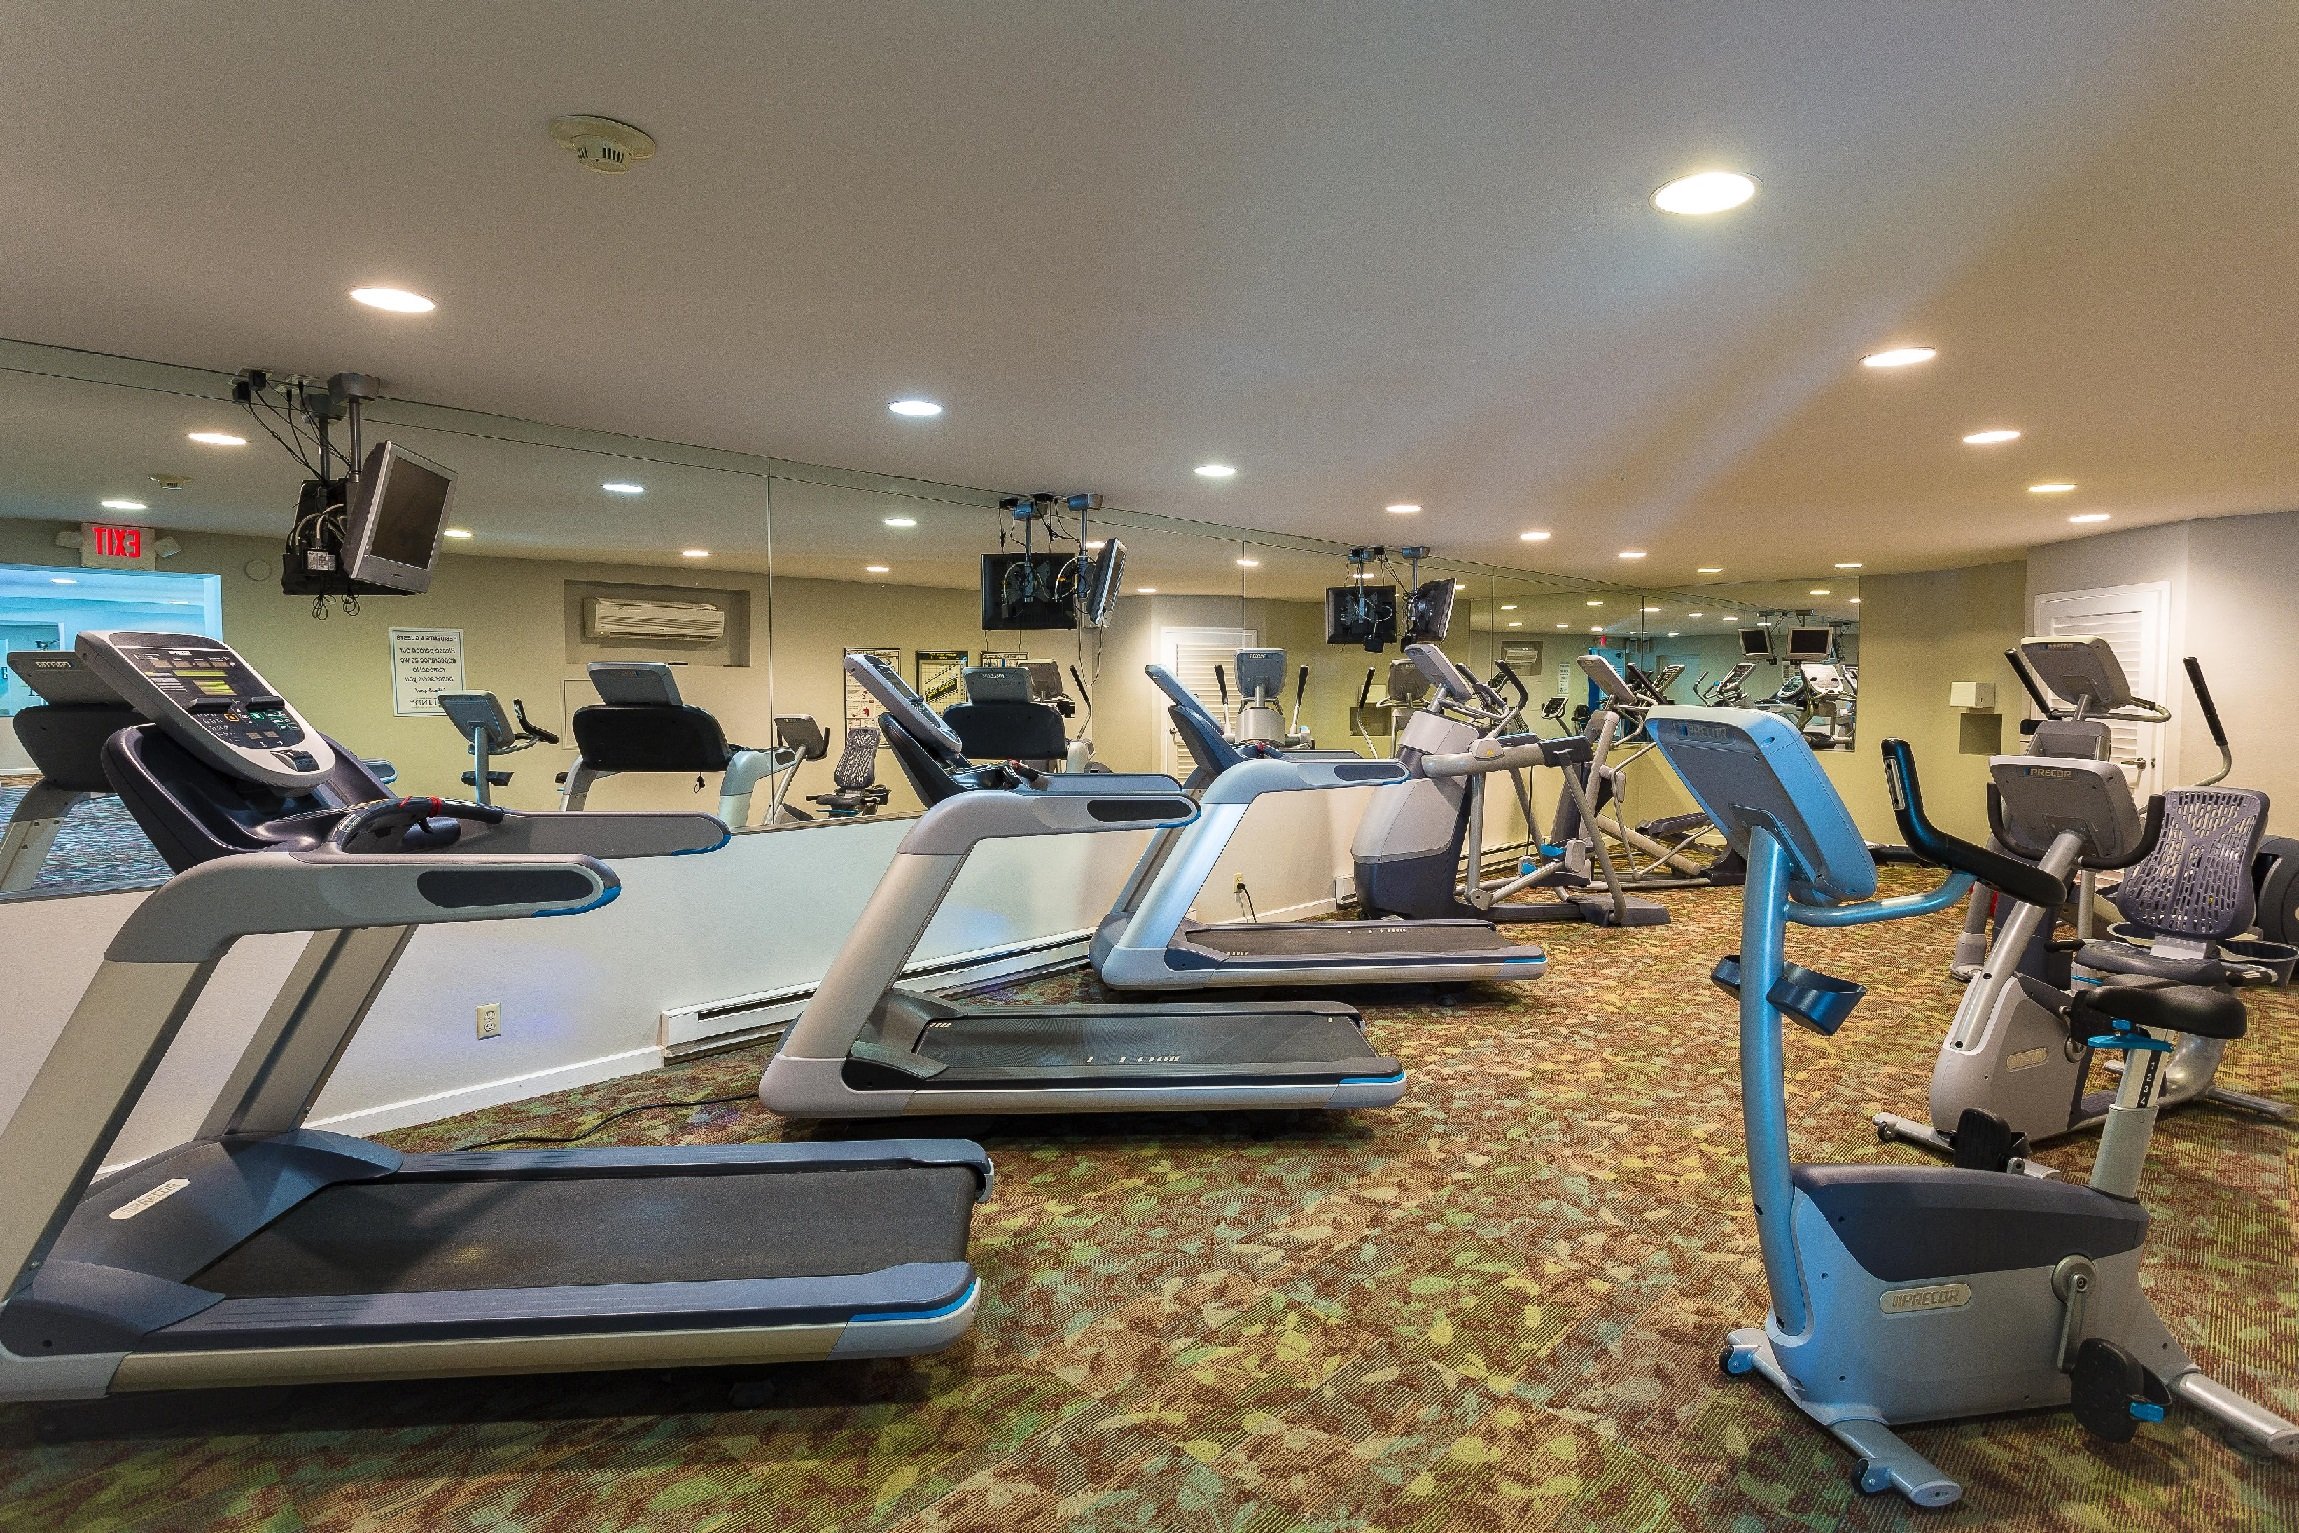 Fitness center with televisions, treadmills, and indoor bicycles